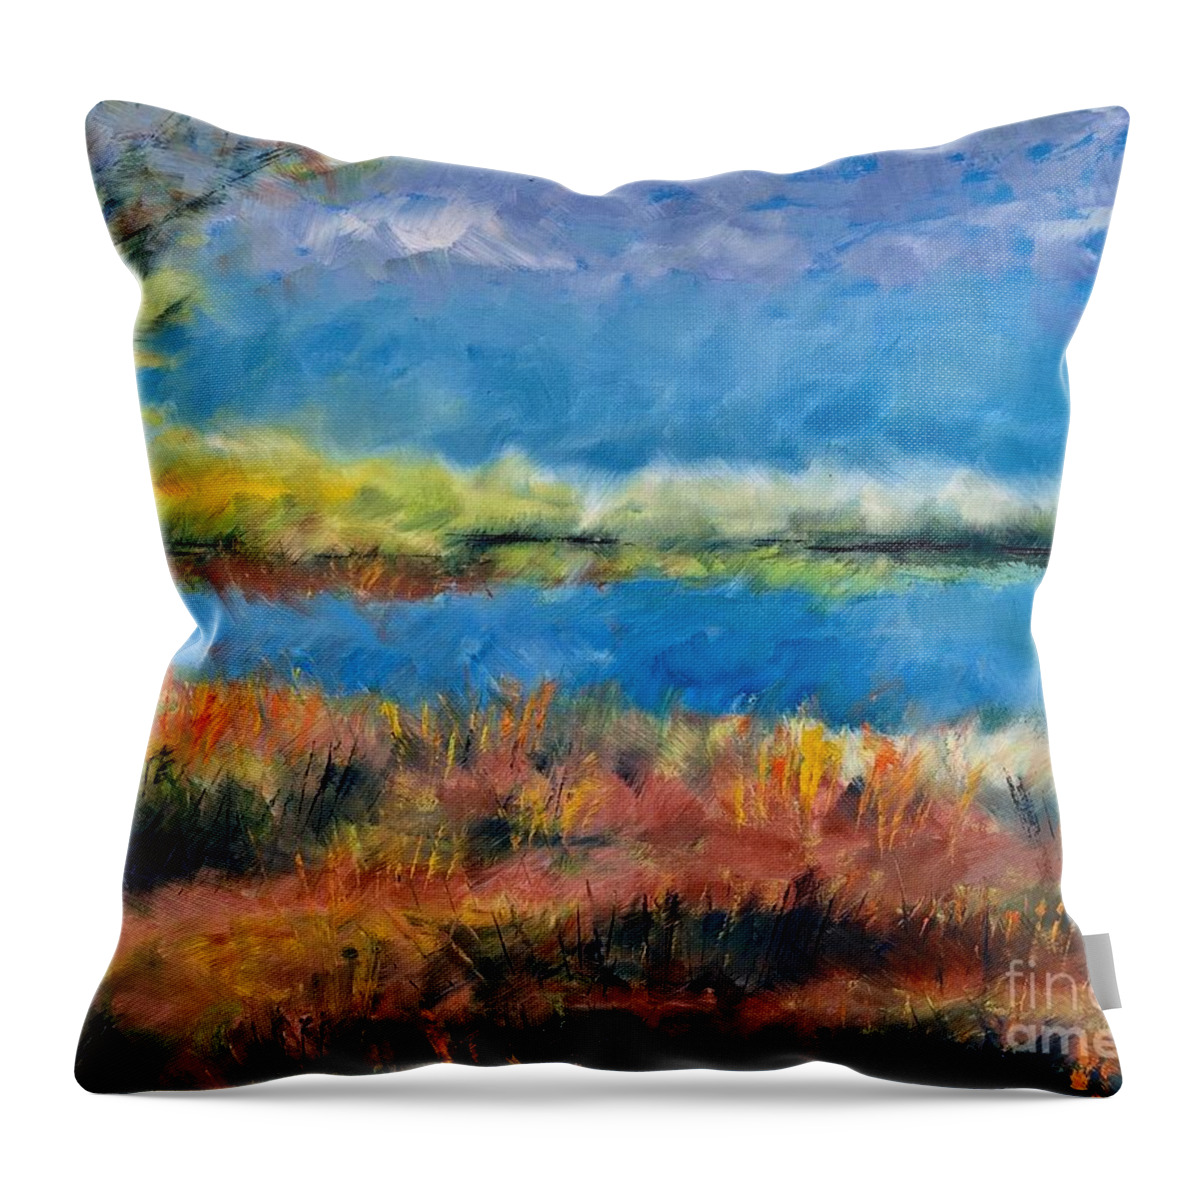 Grass Throw Pillow featuring the painting Tall Grass by Alan Metzger